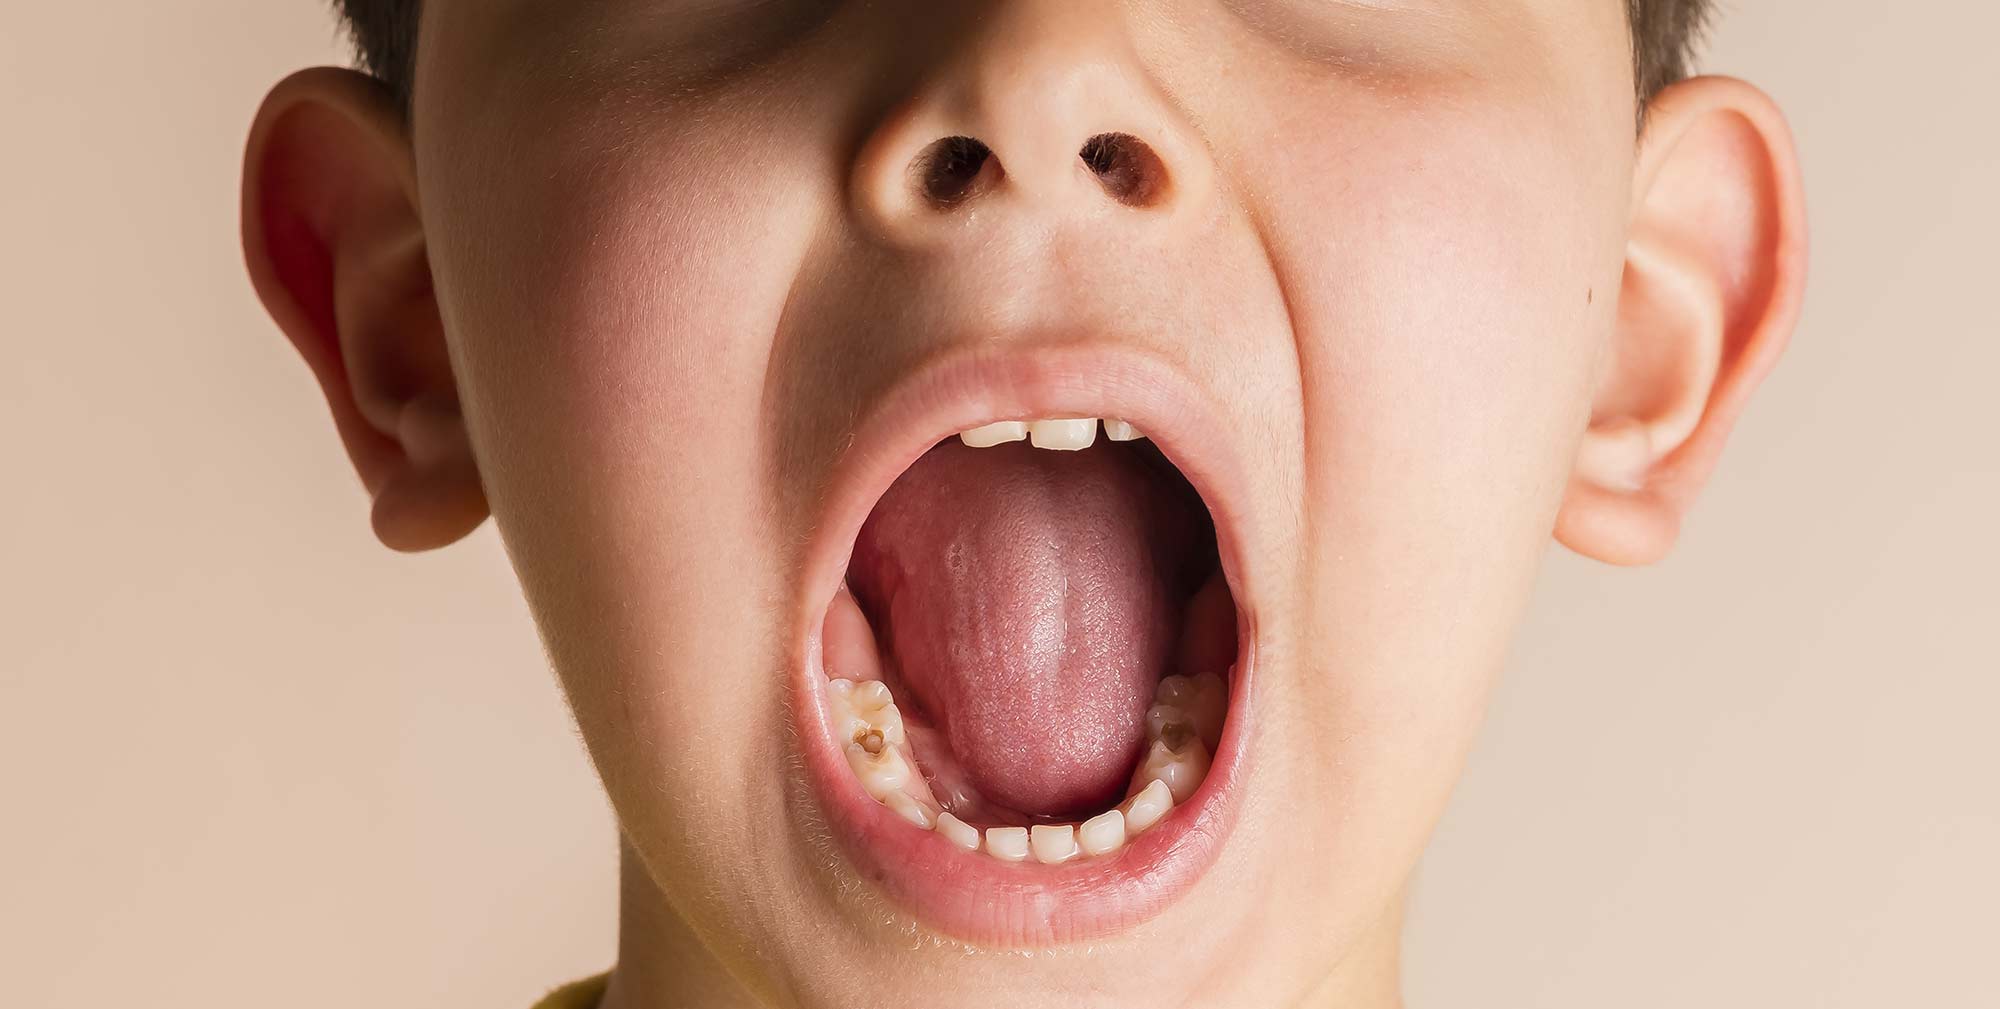 Tooth decay remains the number one reason for hospital admission among five to nine year olds, according to new figures